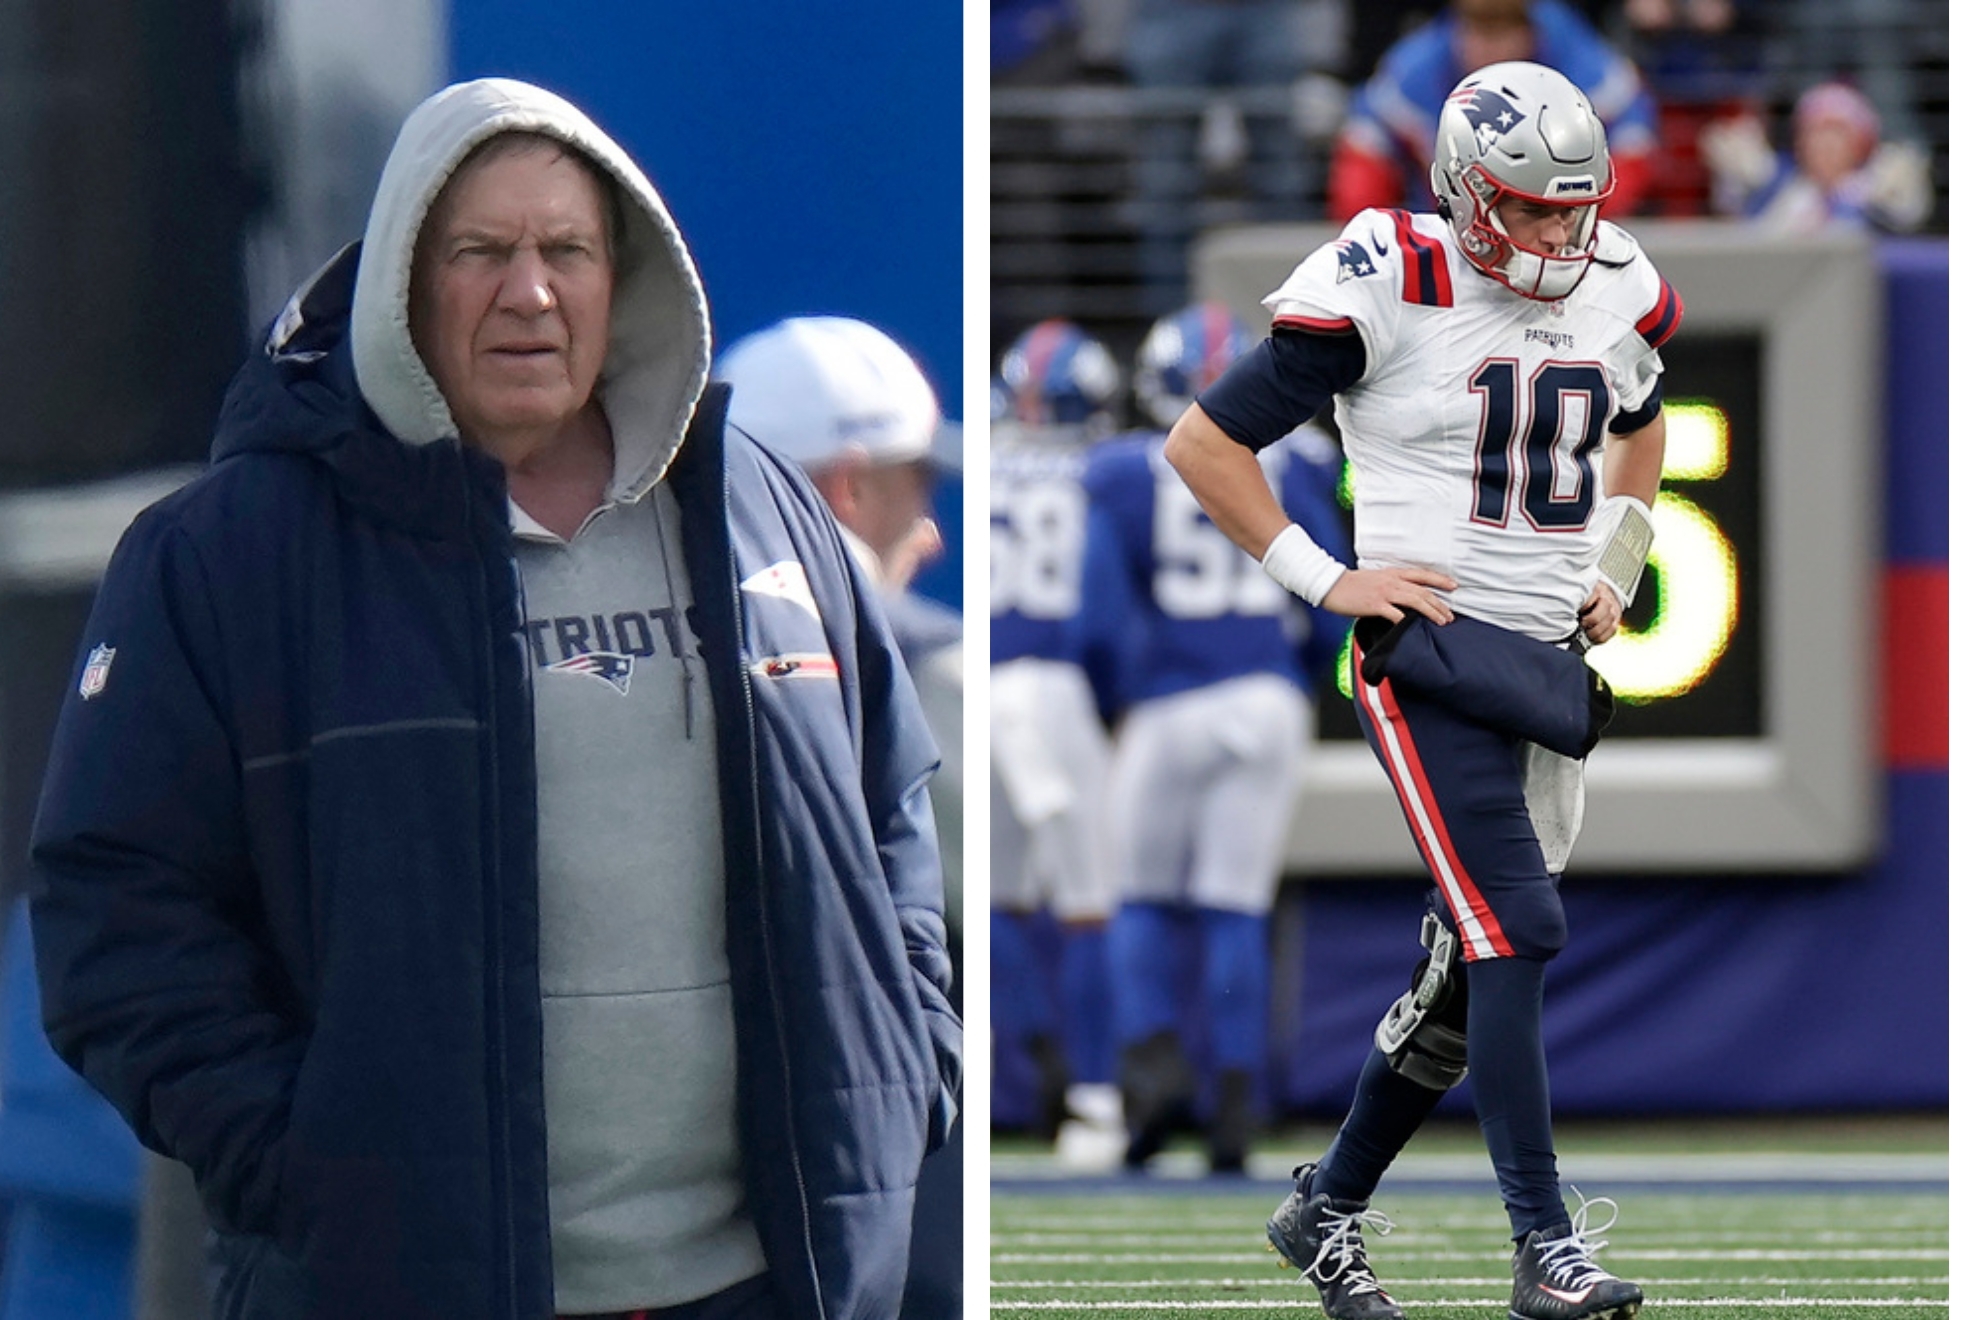 The Patriots have had a nightmare season with a record of 2-8